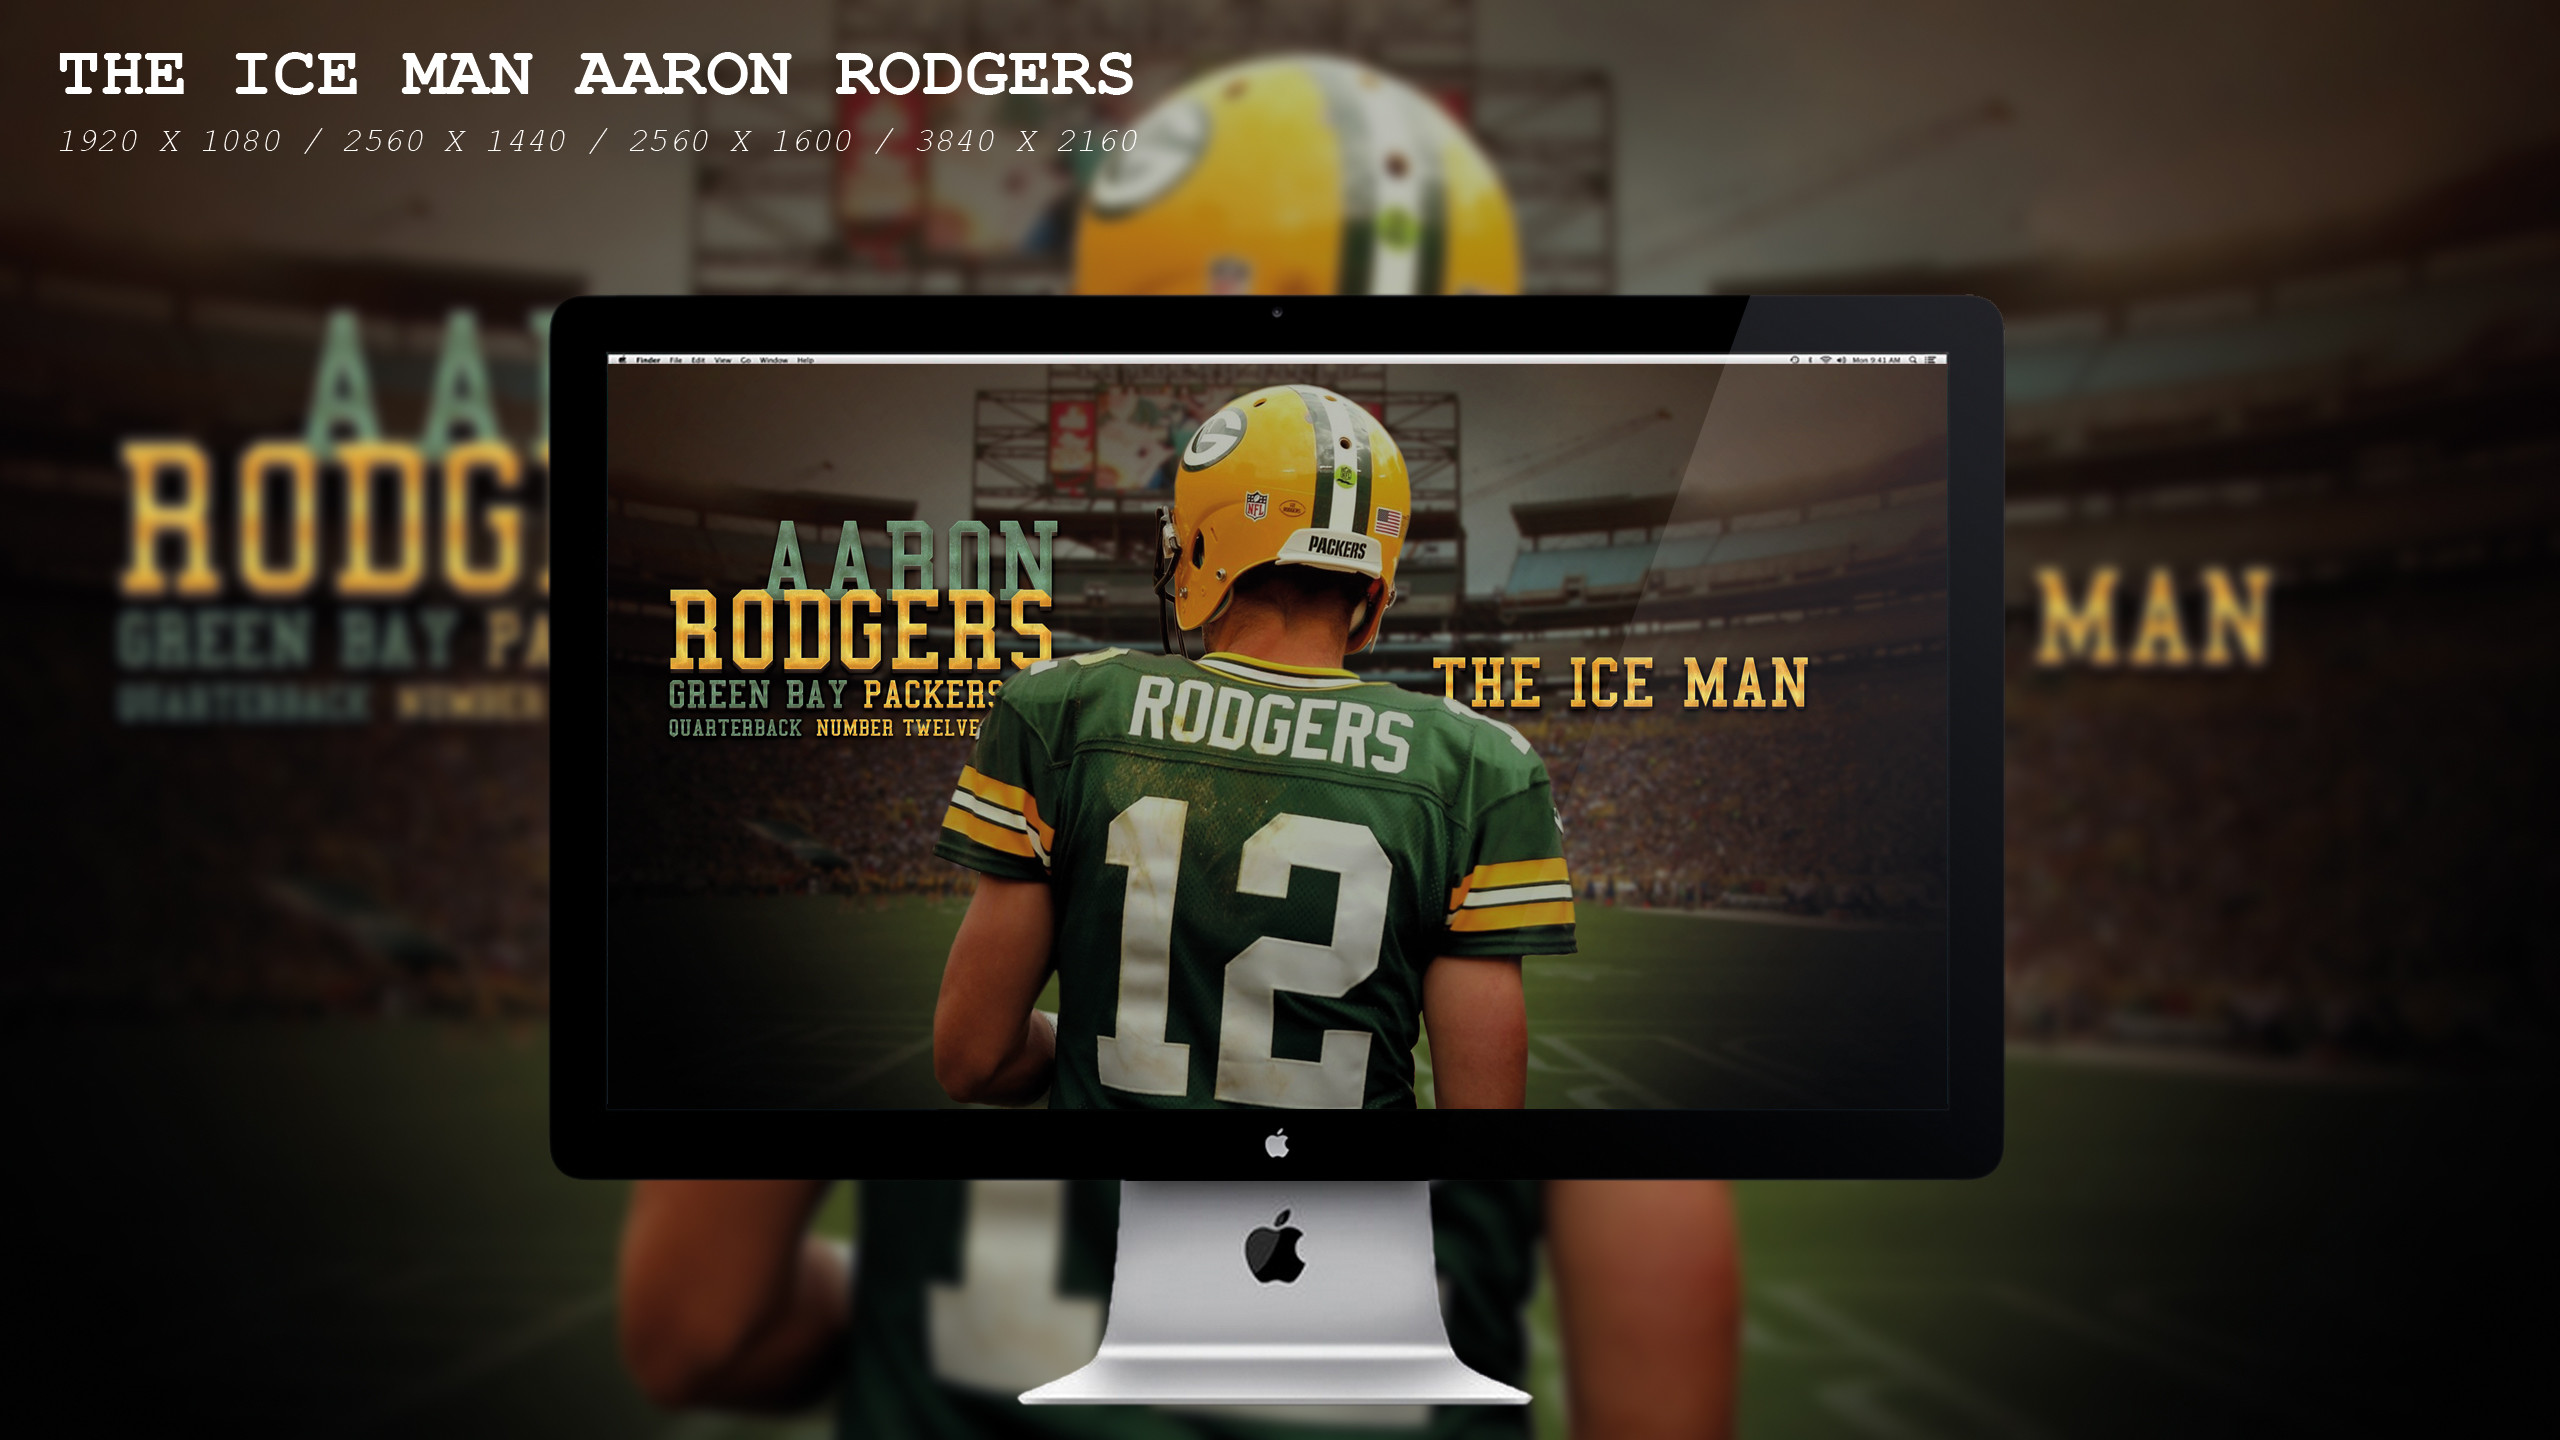 2560x1440 ... The Ice Man Aaron Rodgers Wallpaper HD by BeAware8